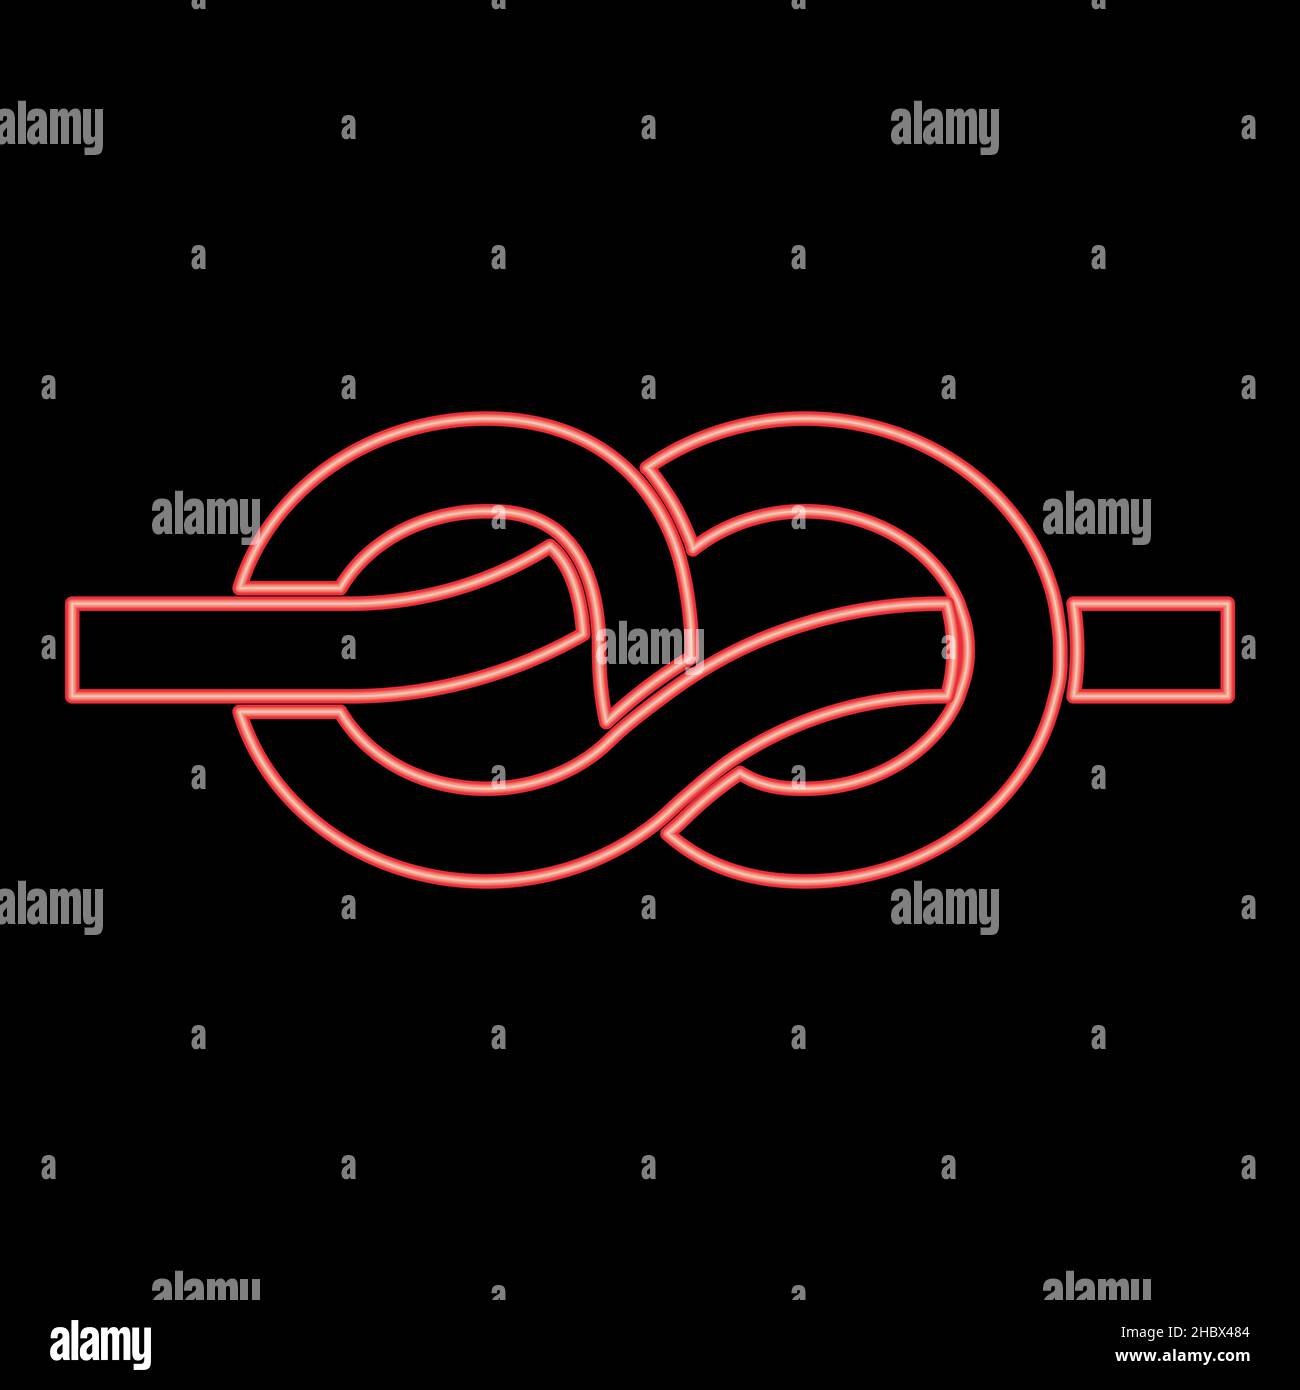 Neon knot red color vector illustration image flat style light Stock Vector